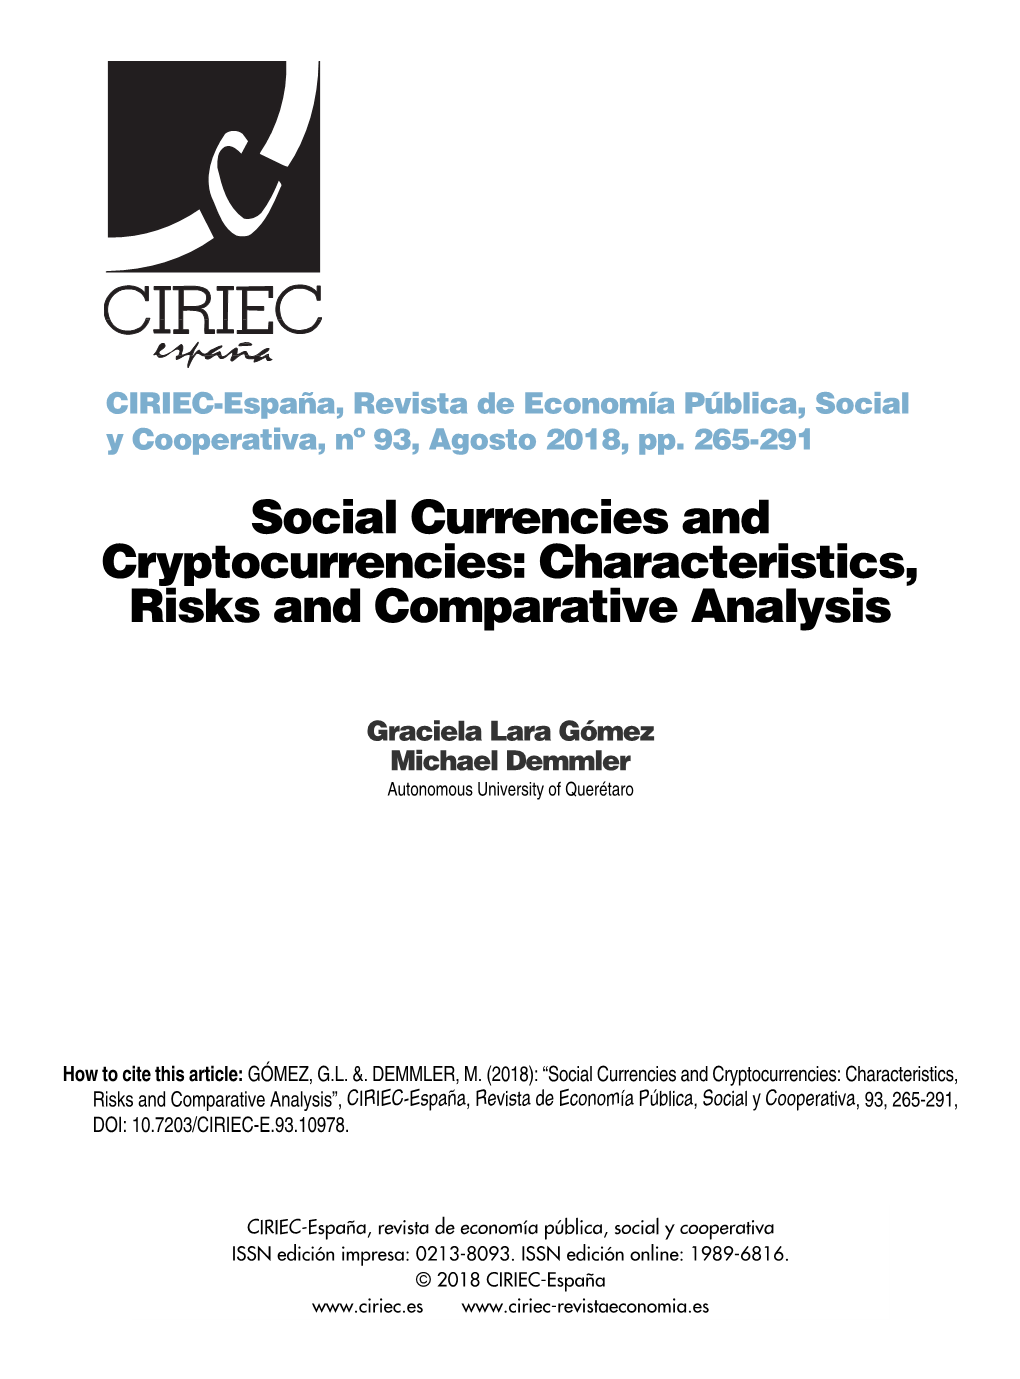 Social Currencies and Cryptocurrencies: Characteristics, Risks and Comparative Analysis